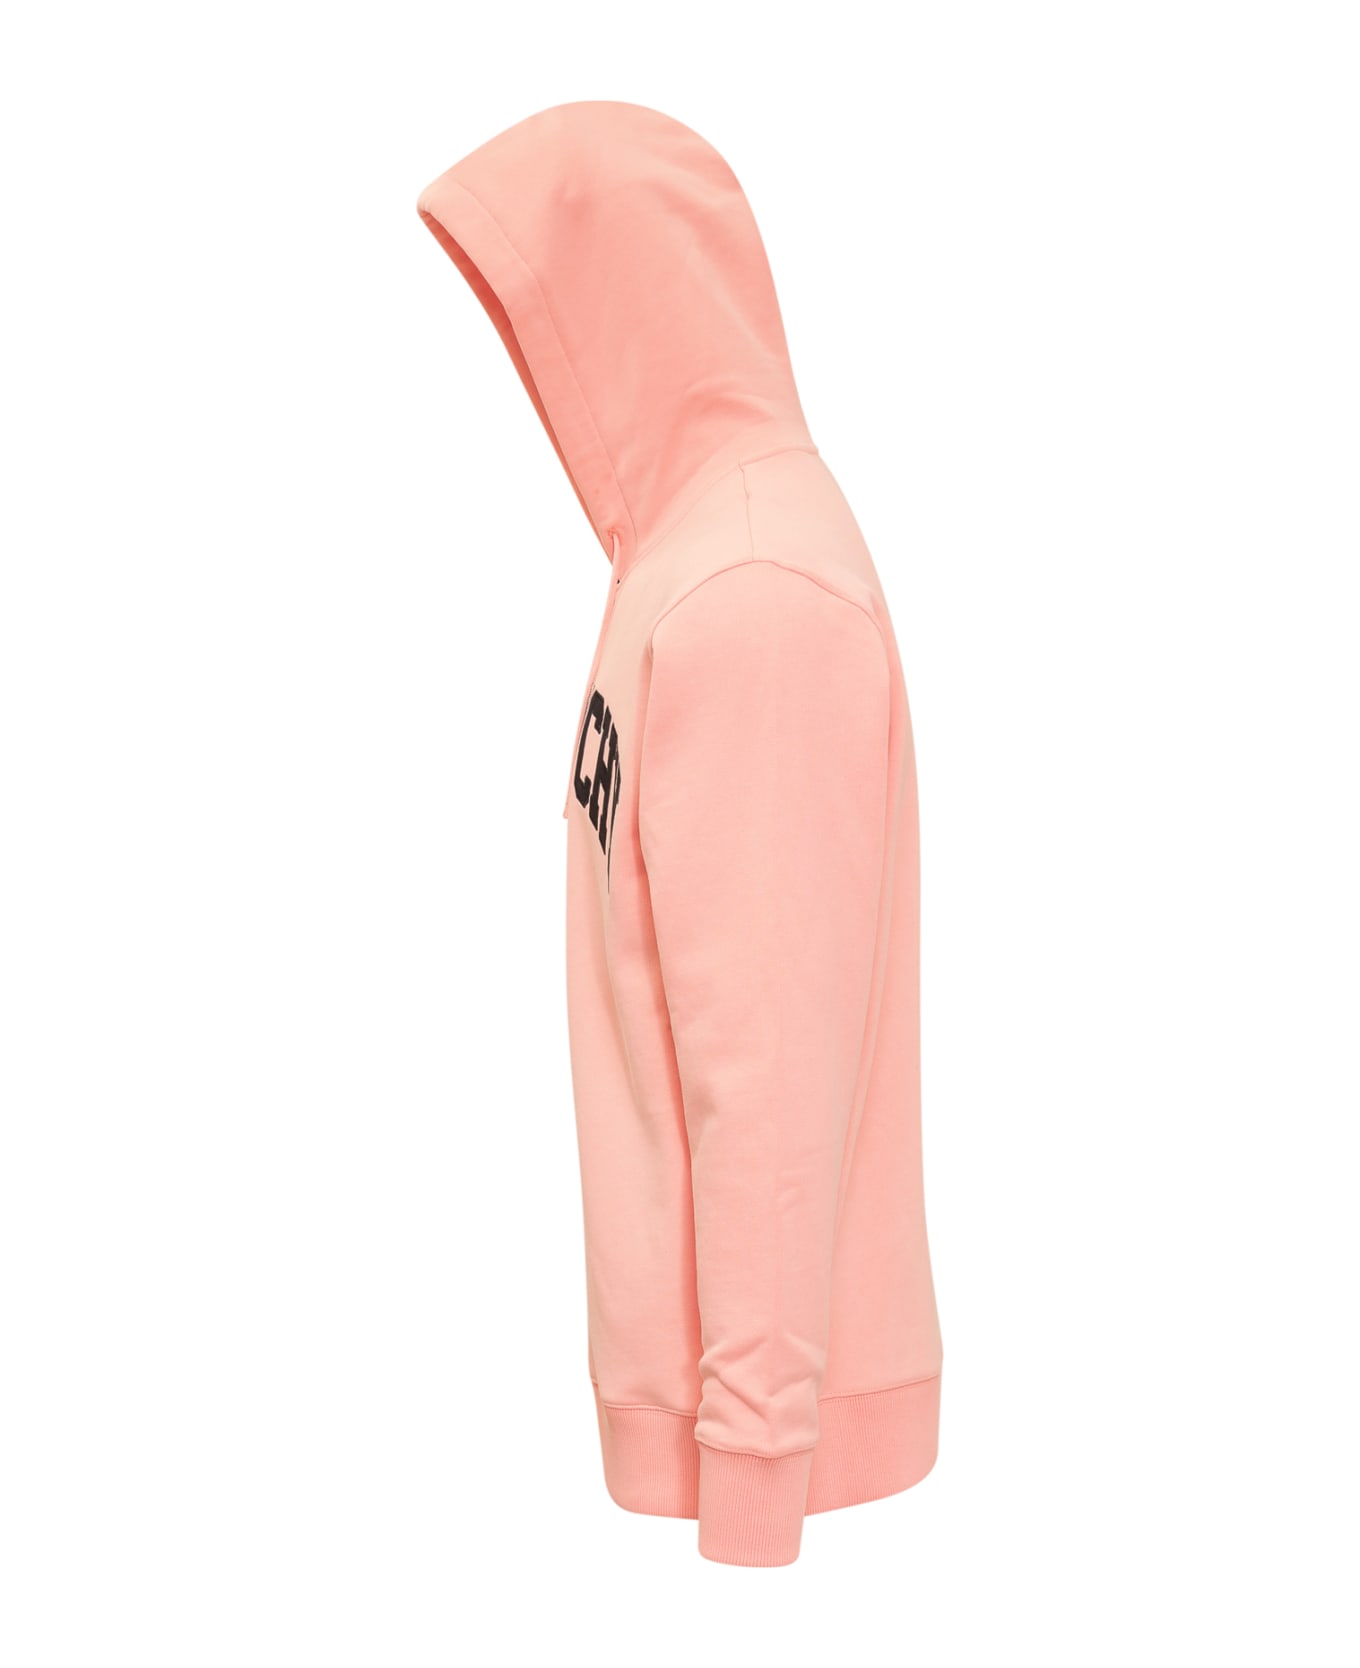 Givenchy Full Zip Hoodie - Coral